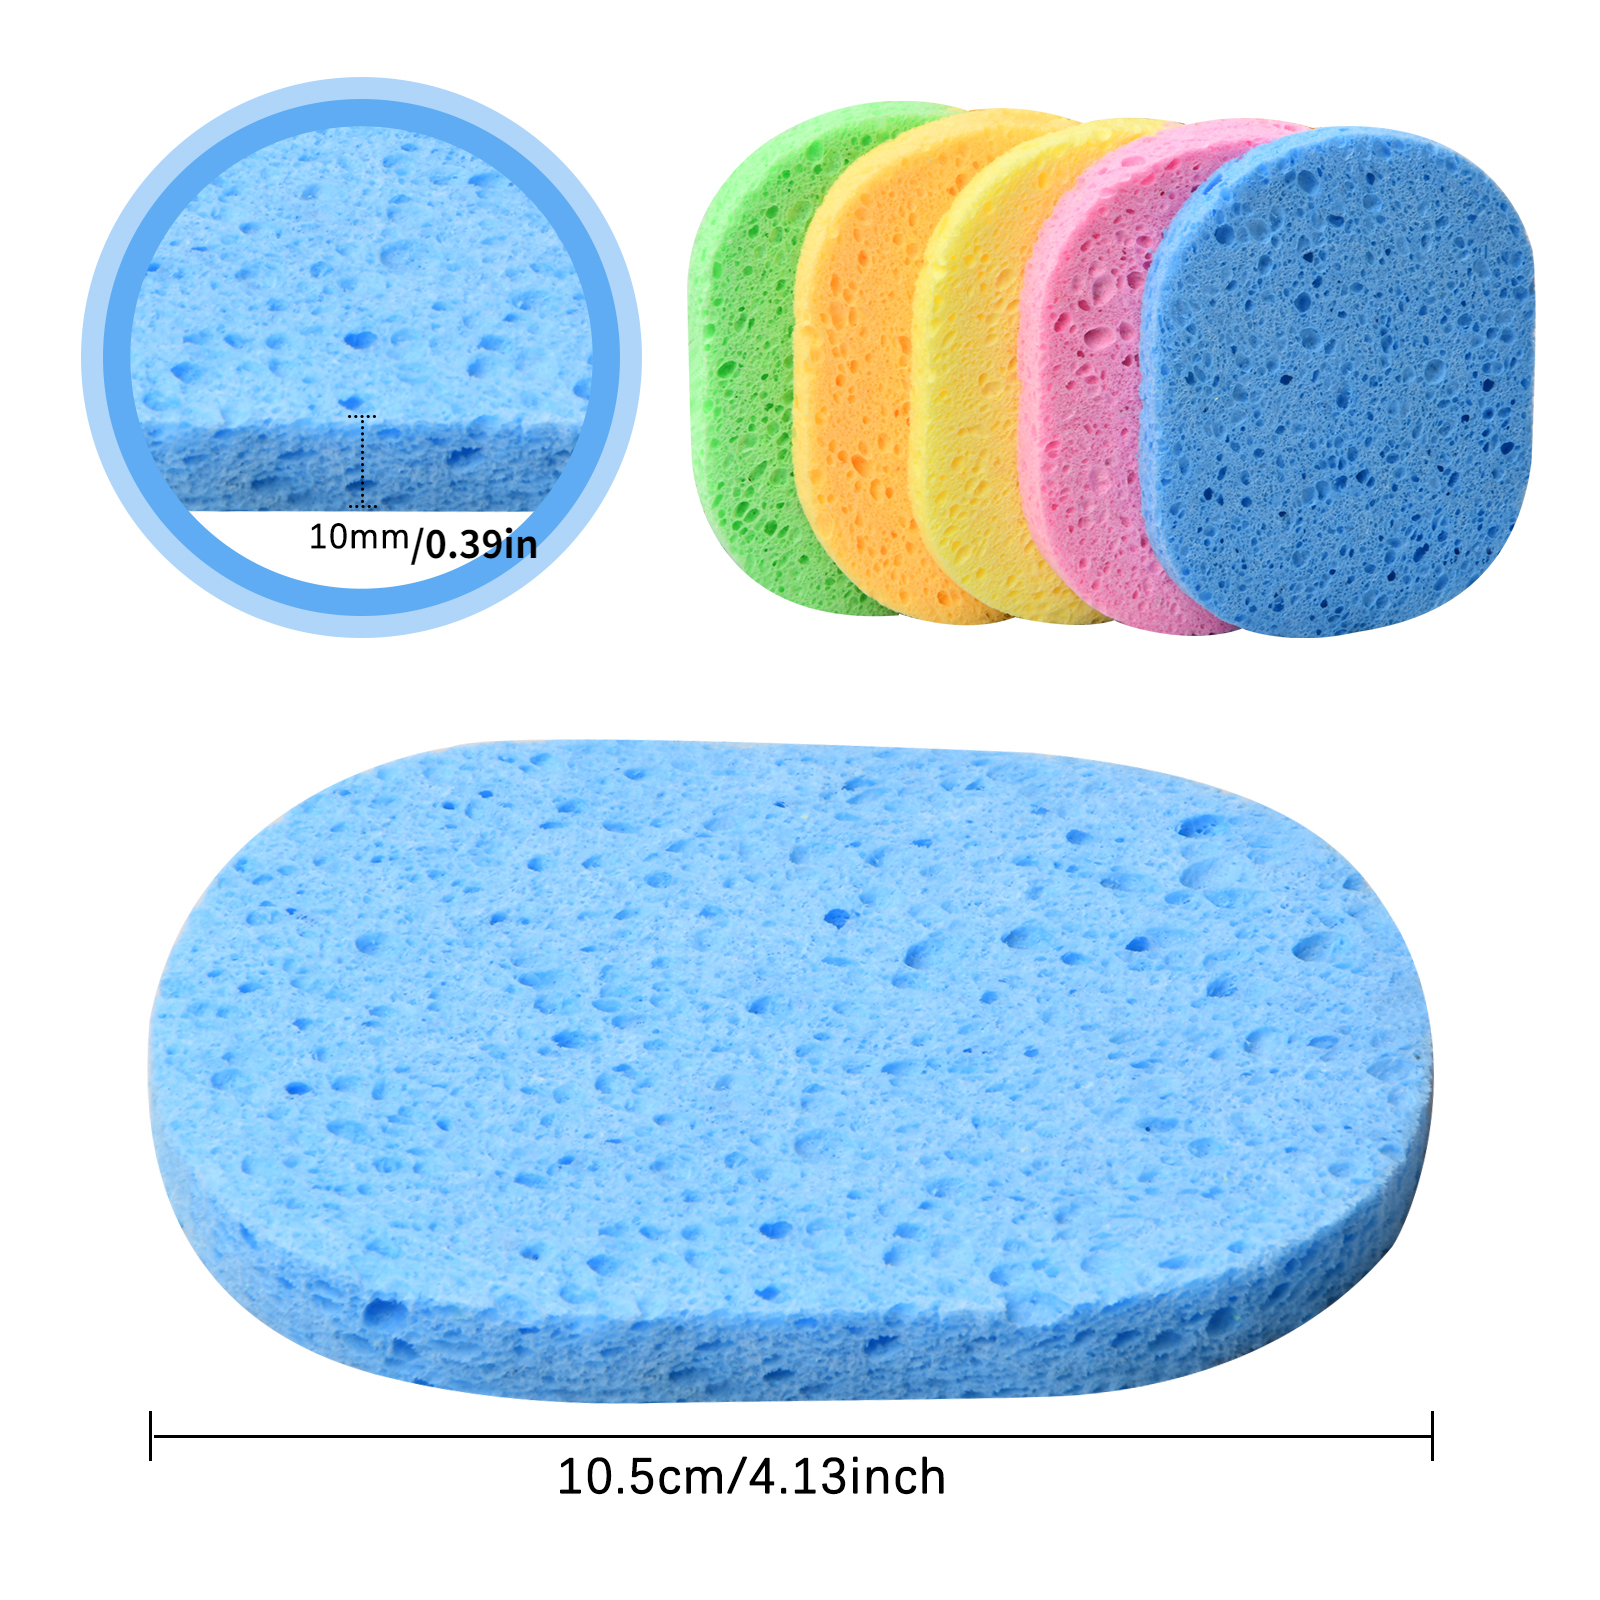 Heart Shape Face Sponge Facial Sponges Compressed Natural Cellulose Sponge for Washing Face Cleansing, Size: 54 in